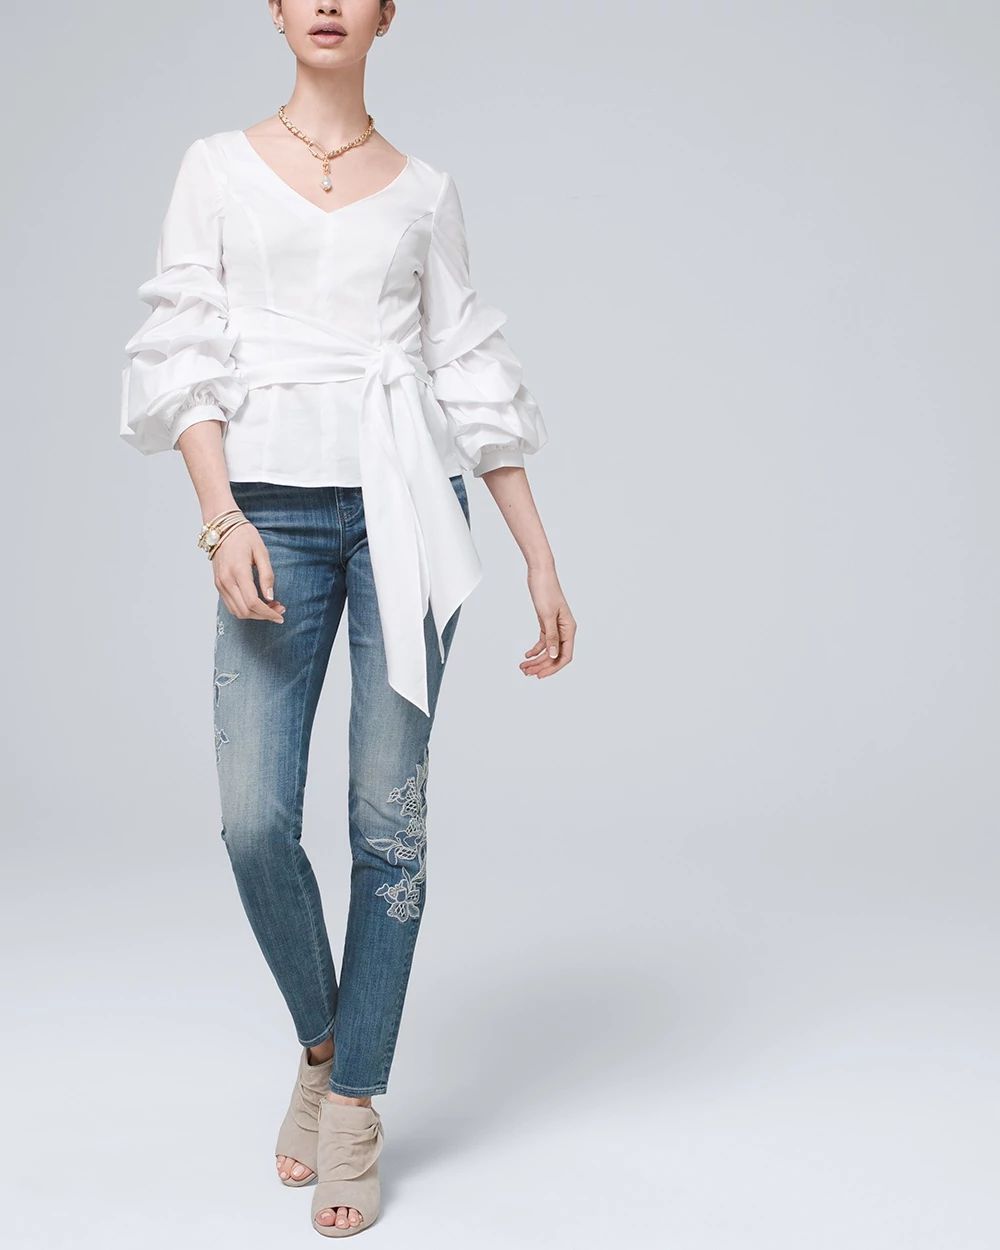 High-Rise Eveyday Soft Denim Embroidered Skinny Jeans click to view larger image.